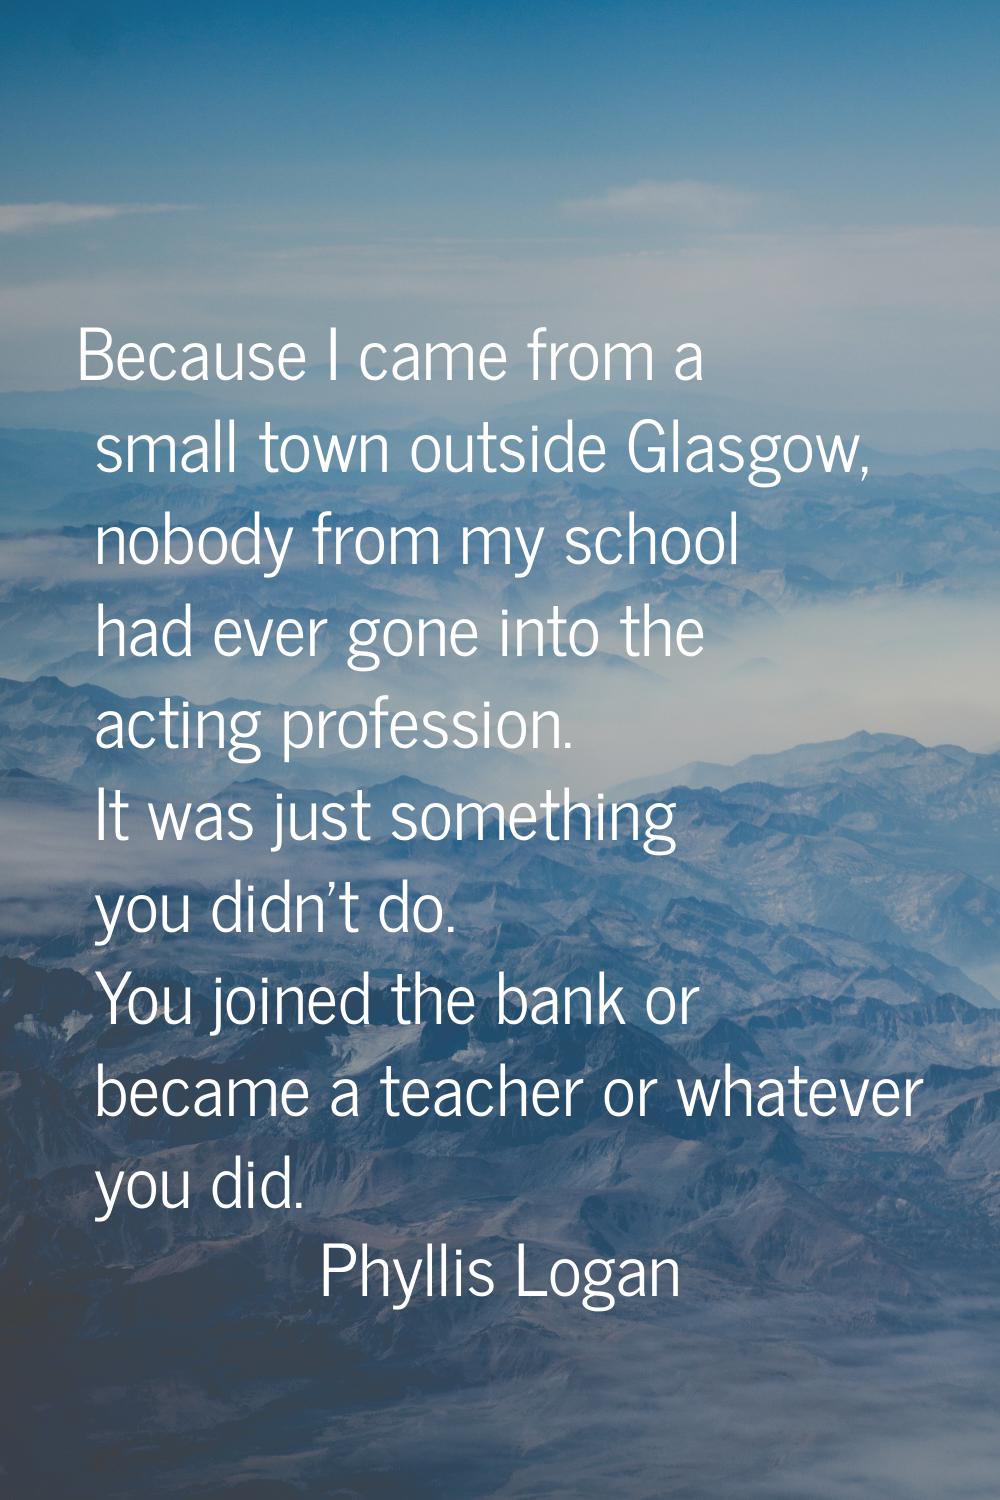 Because I came from a small town outside Glasgow, nobody from my school had ever gone into the acti